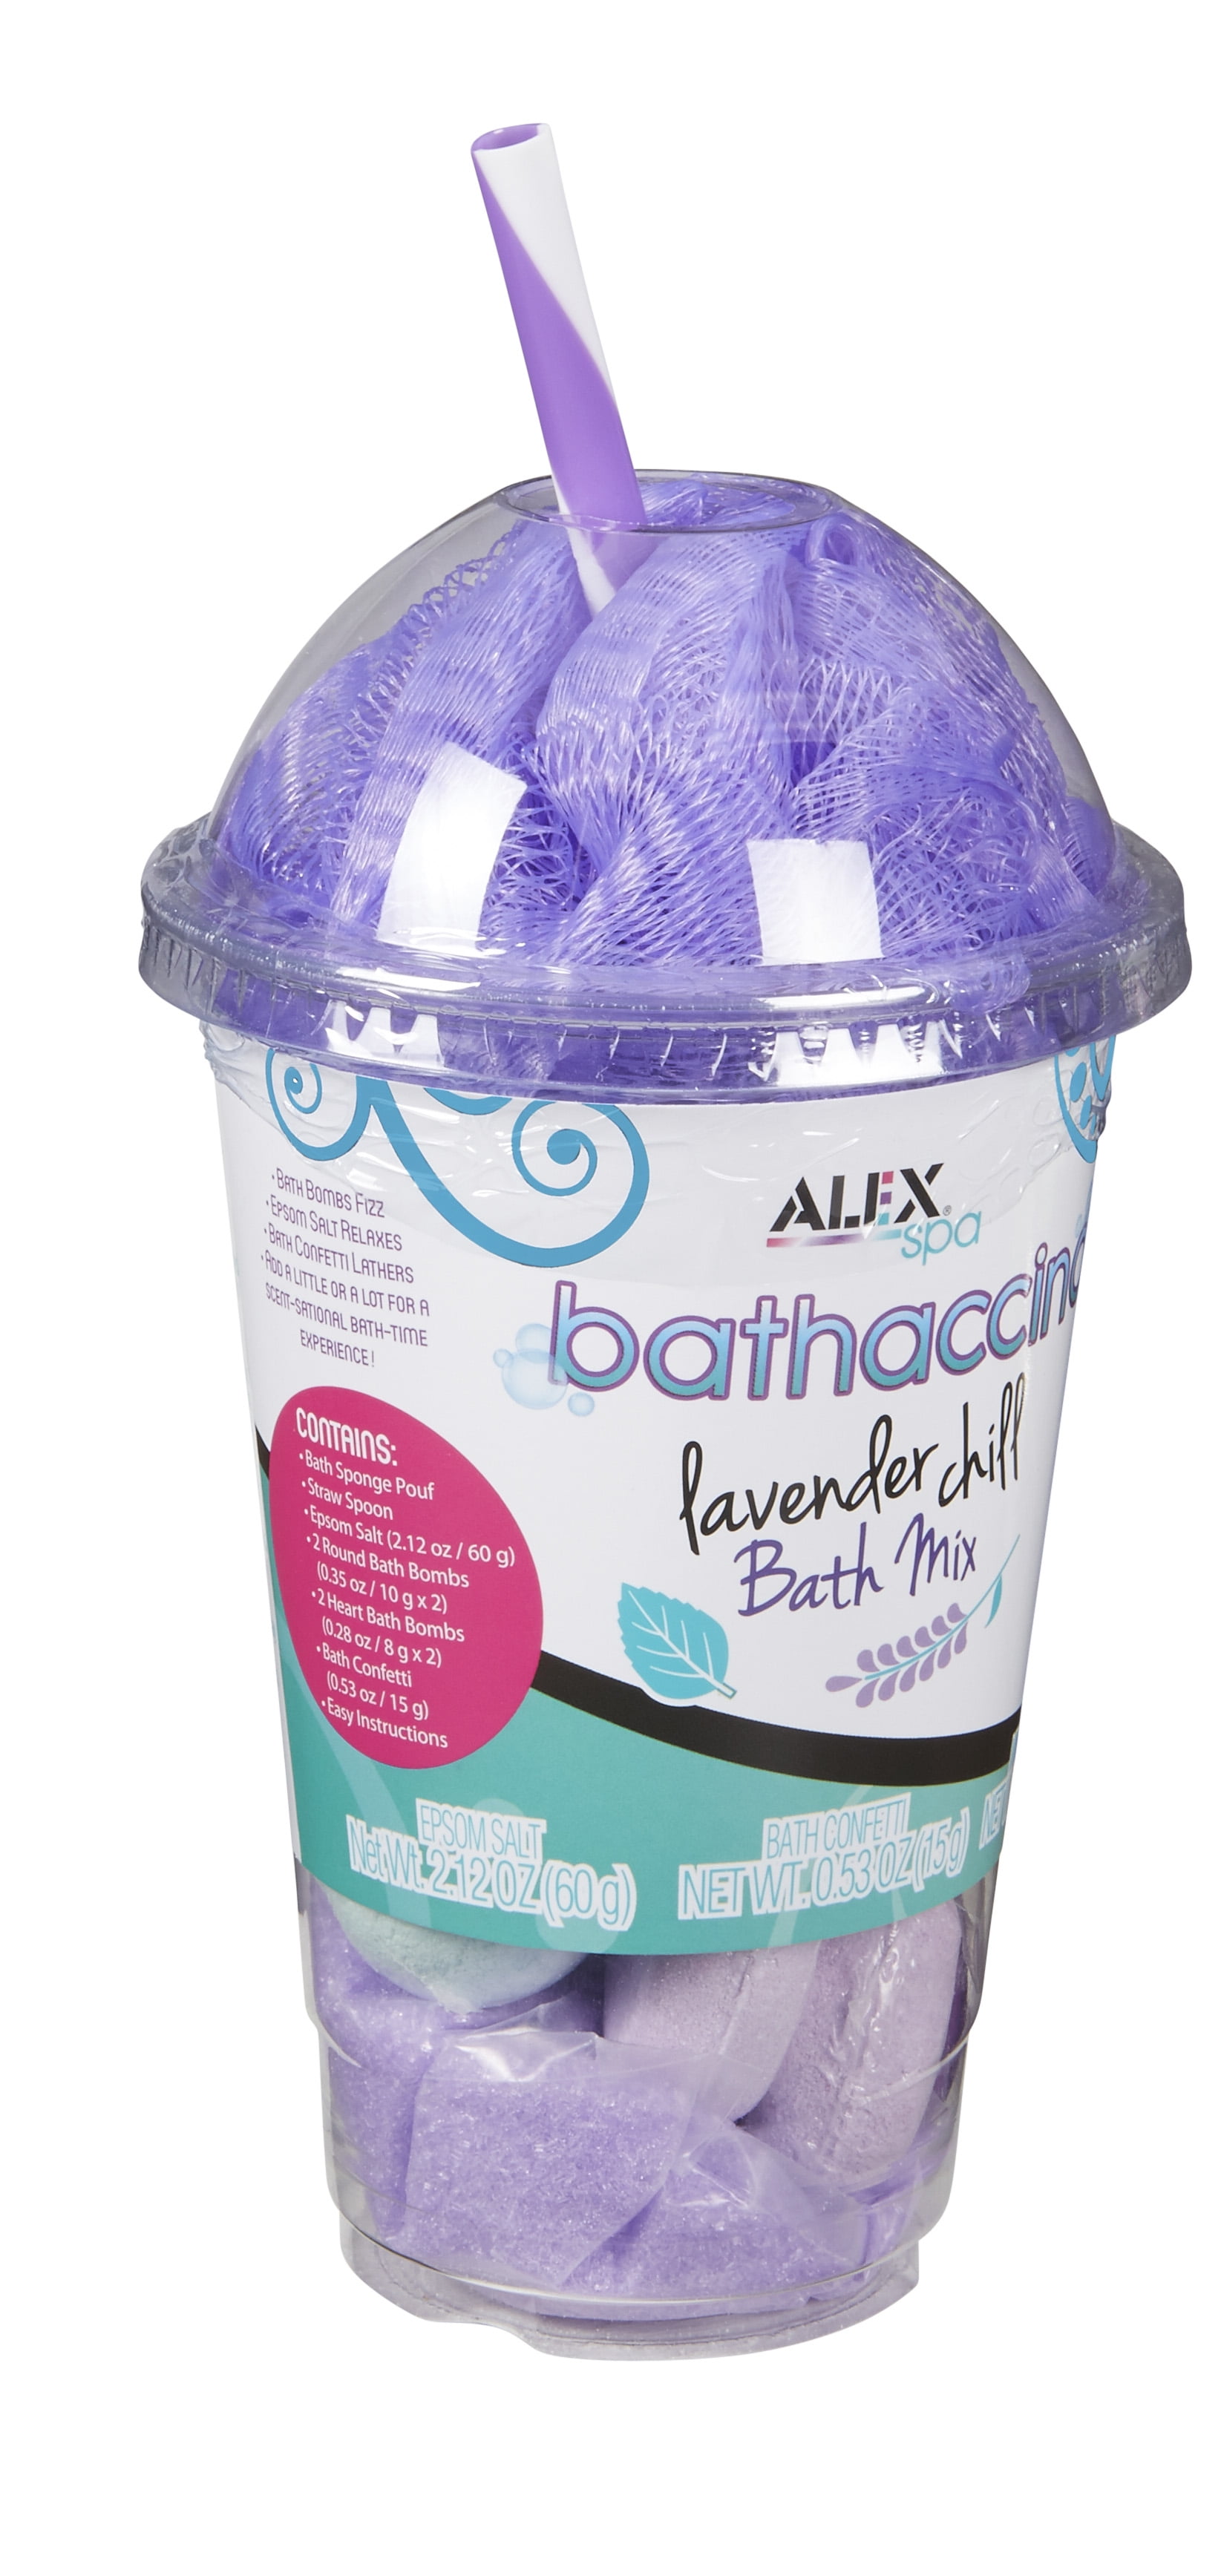 YOUniverse Crystal Bath Bombs, Mix & Mold Your Own Bath Bomb Kit, Boys and  Girls, Child, Ages 6+